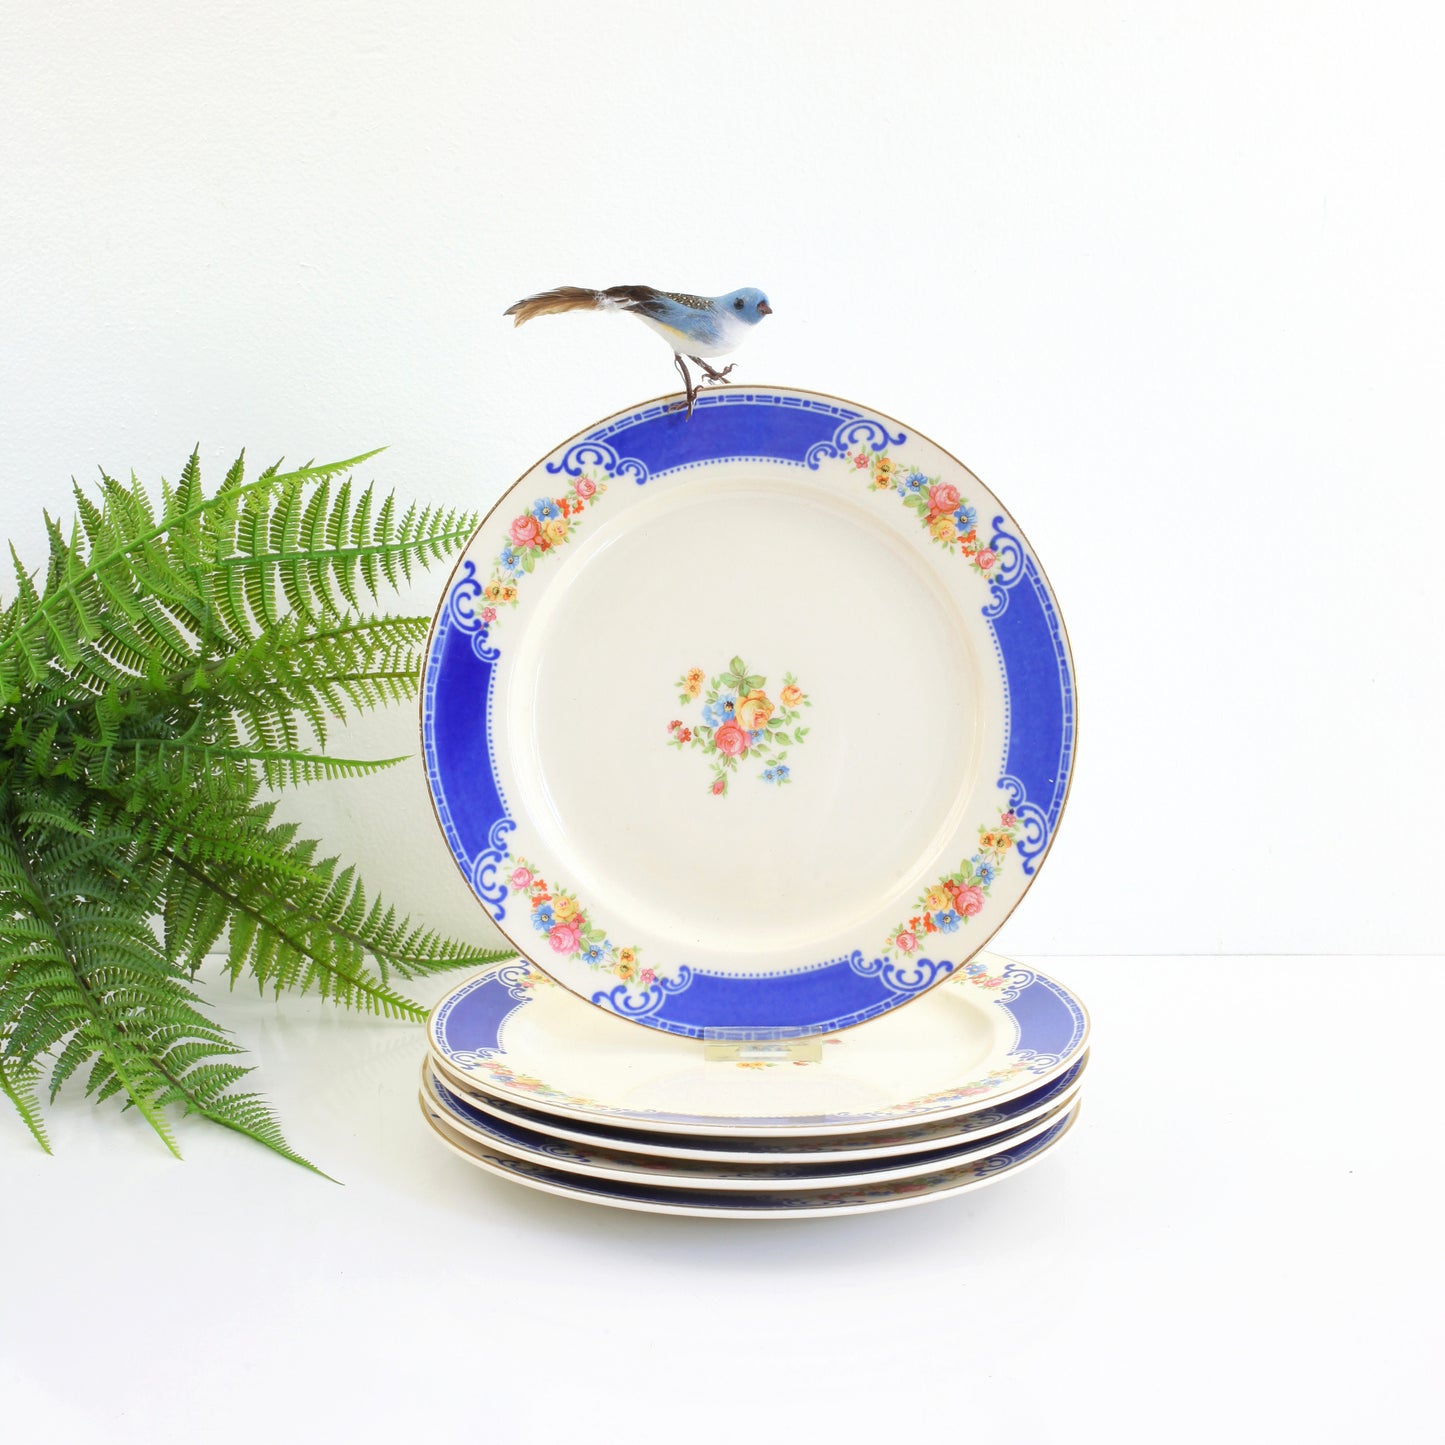 SOLD - Vintage 1930s Homer Laughlin Brittany Majestic Blue 9" Plate